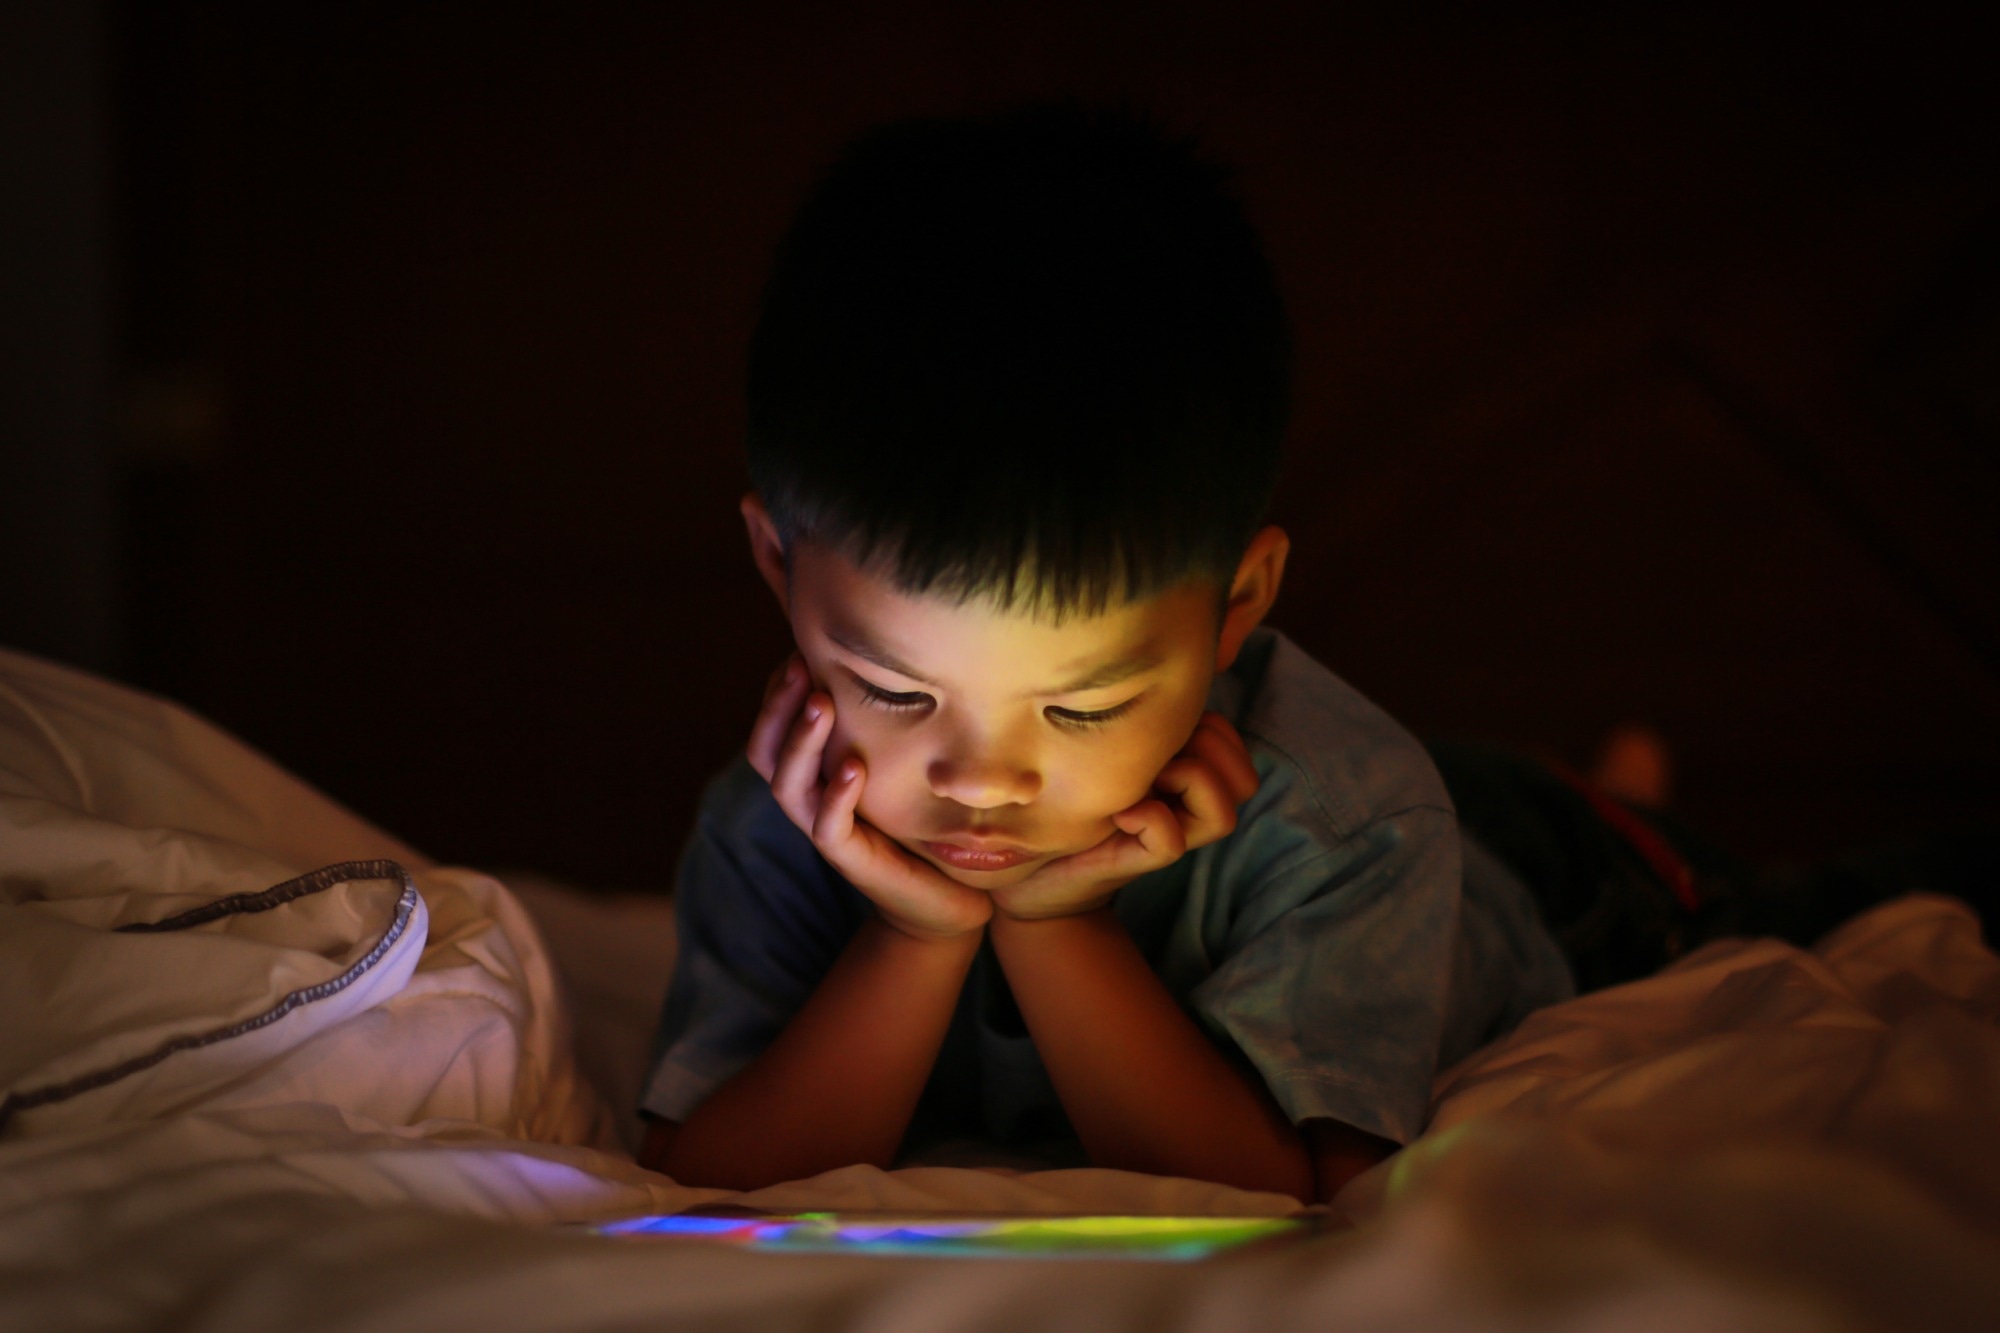 In the wake of COVID restrictions being lifted, kids’ screen time has remained high